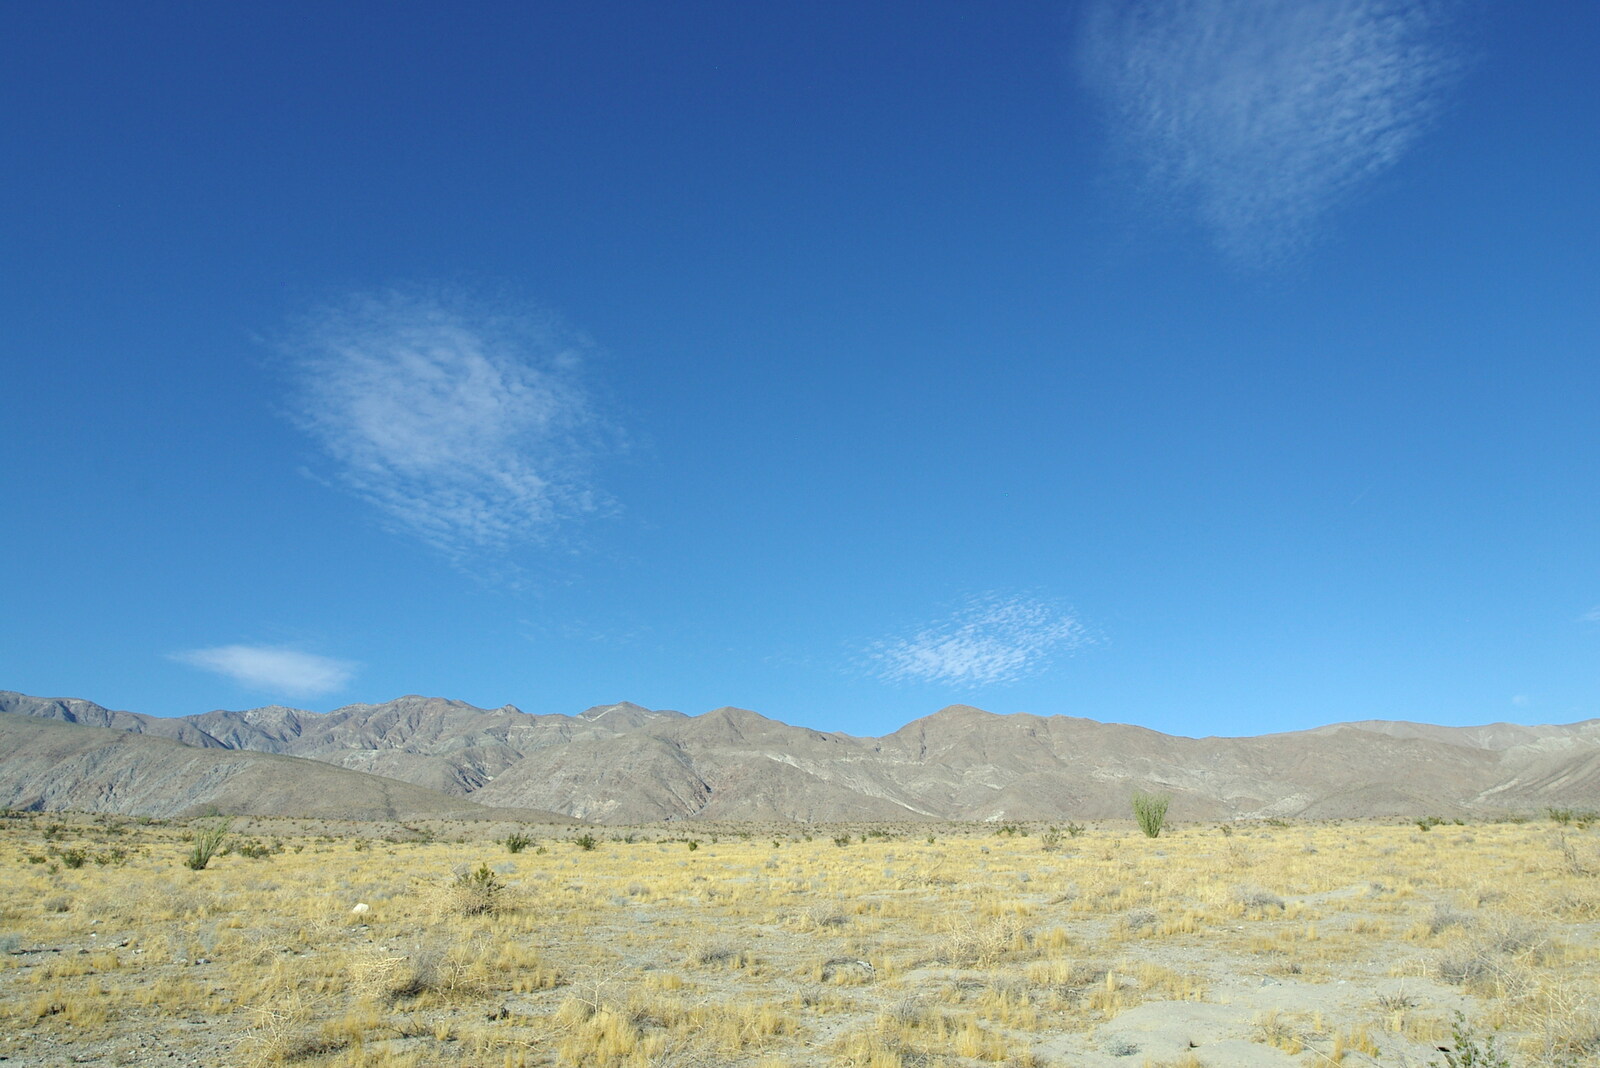 Some nice clouds which look like dots on dice from California Desert 2: The Salton Sea and Anza-Borrego to Julian, California, US - 24th September 2005